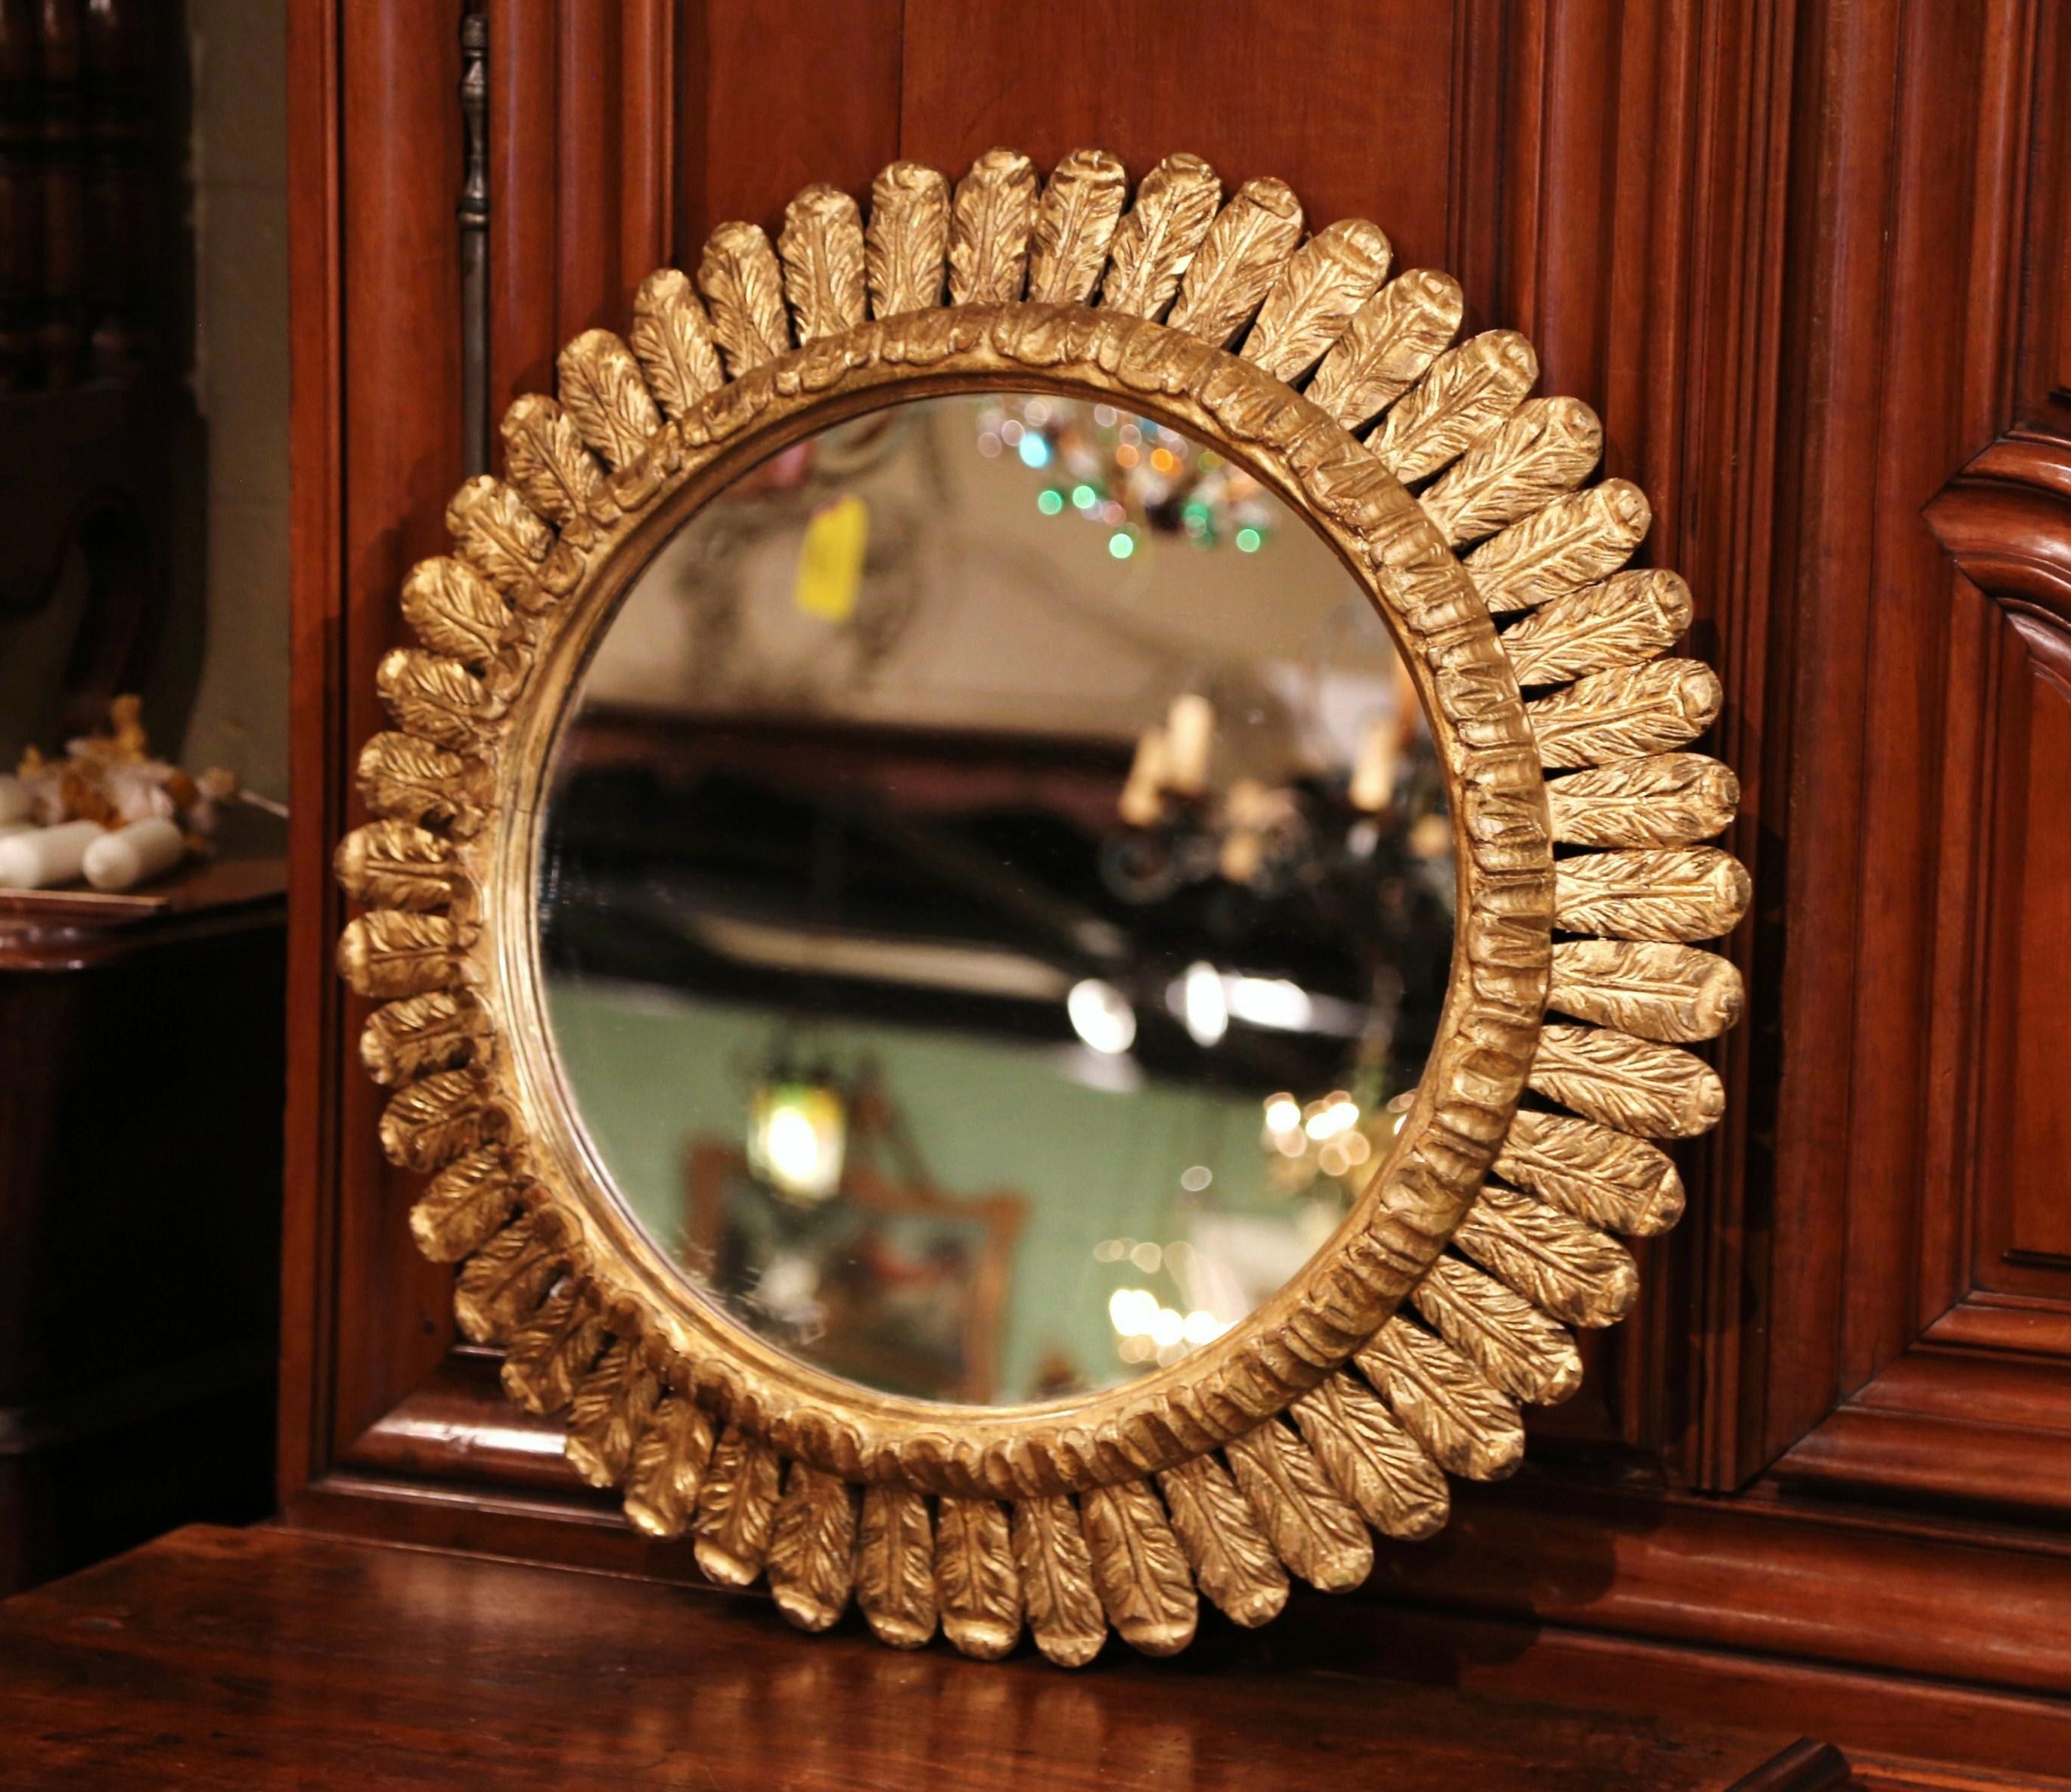 Create a focal point in any room with this gleaming, sun mirror from France. Hand carved circa 1940, the large, mid-century piece is decorated with intricate foliage carvings throughout, and has a shape and shimmering texture that resembles the glow